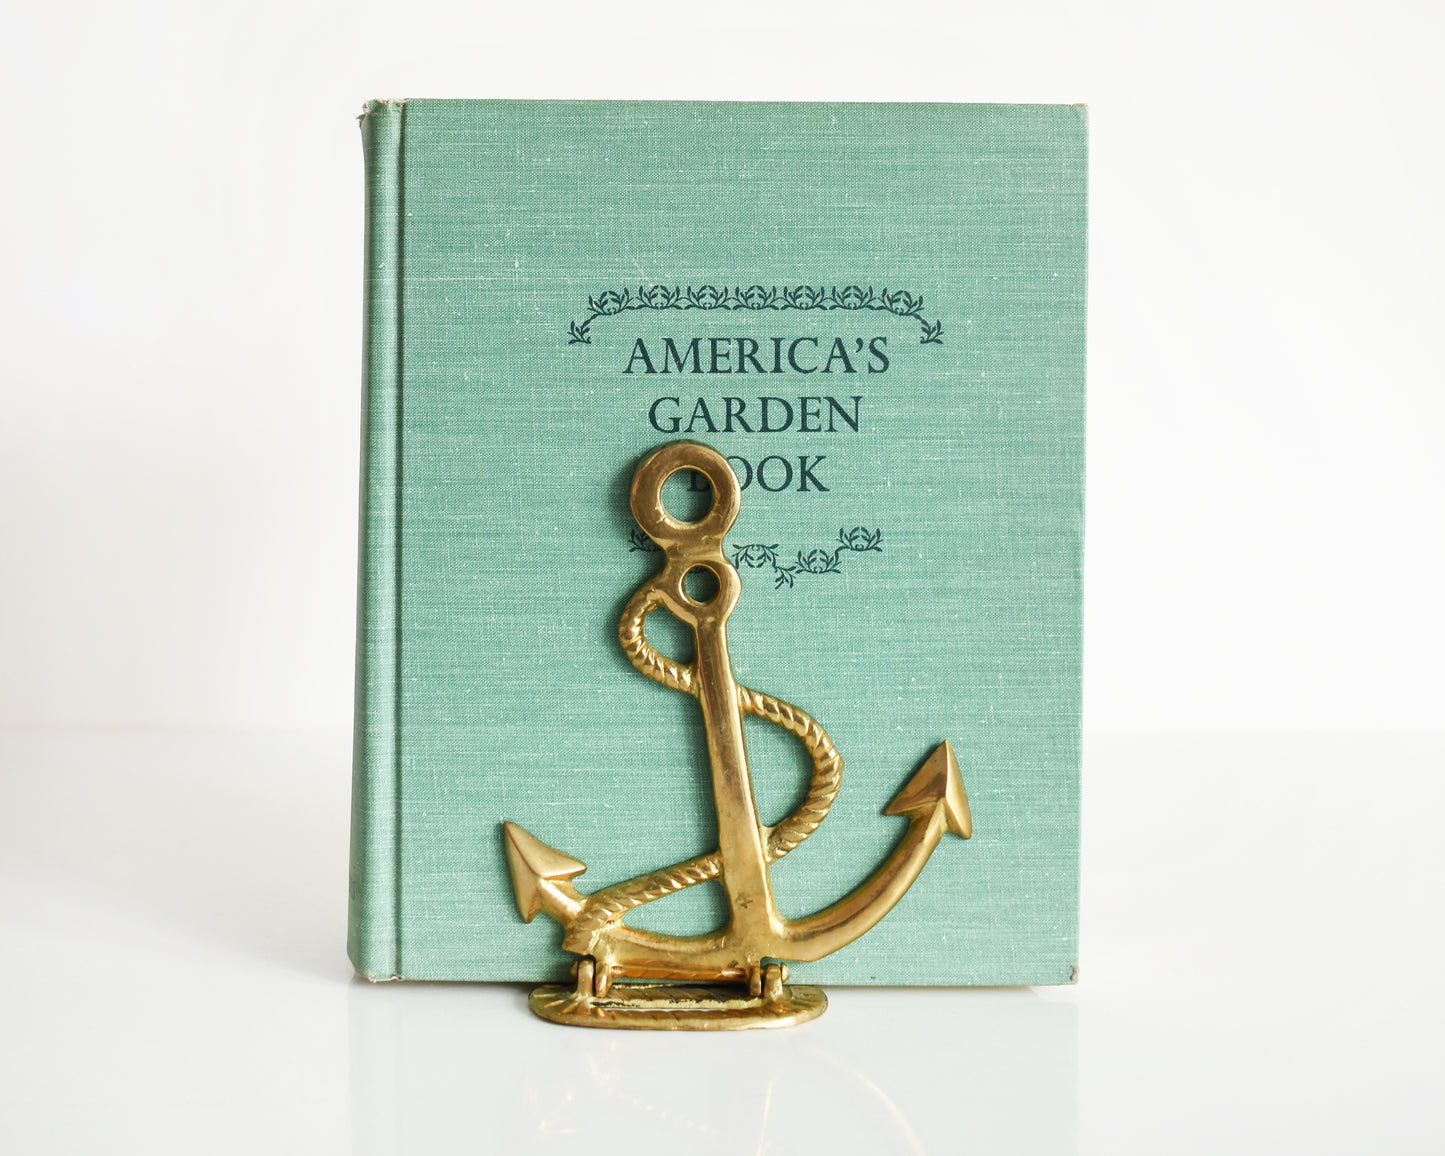 One vintage brass anchor and rope bookend that is holding up a green book